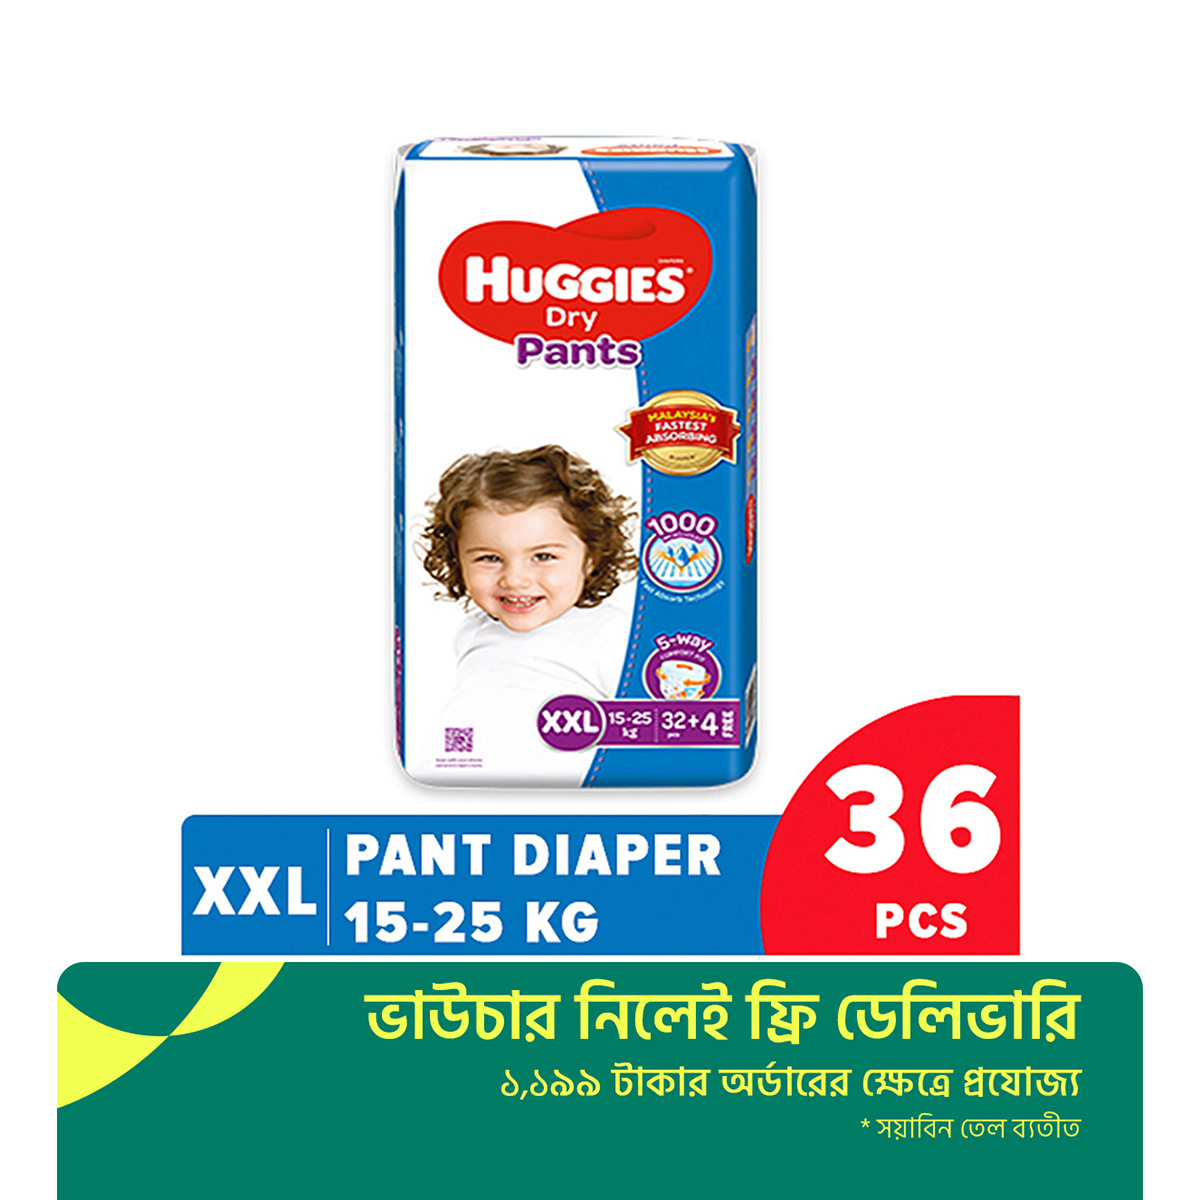 Buy Huggies Nature Care Pants for Babies, Double Extra Large (XXL) Size  Baby Diaper Pants, 18 Count & Mamaearth Deeply nourishing natural baby wash  (400 ml, 0-5 Yrs) Online at Low Prices